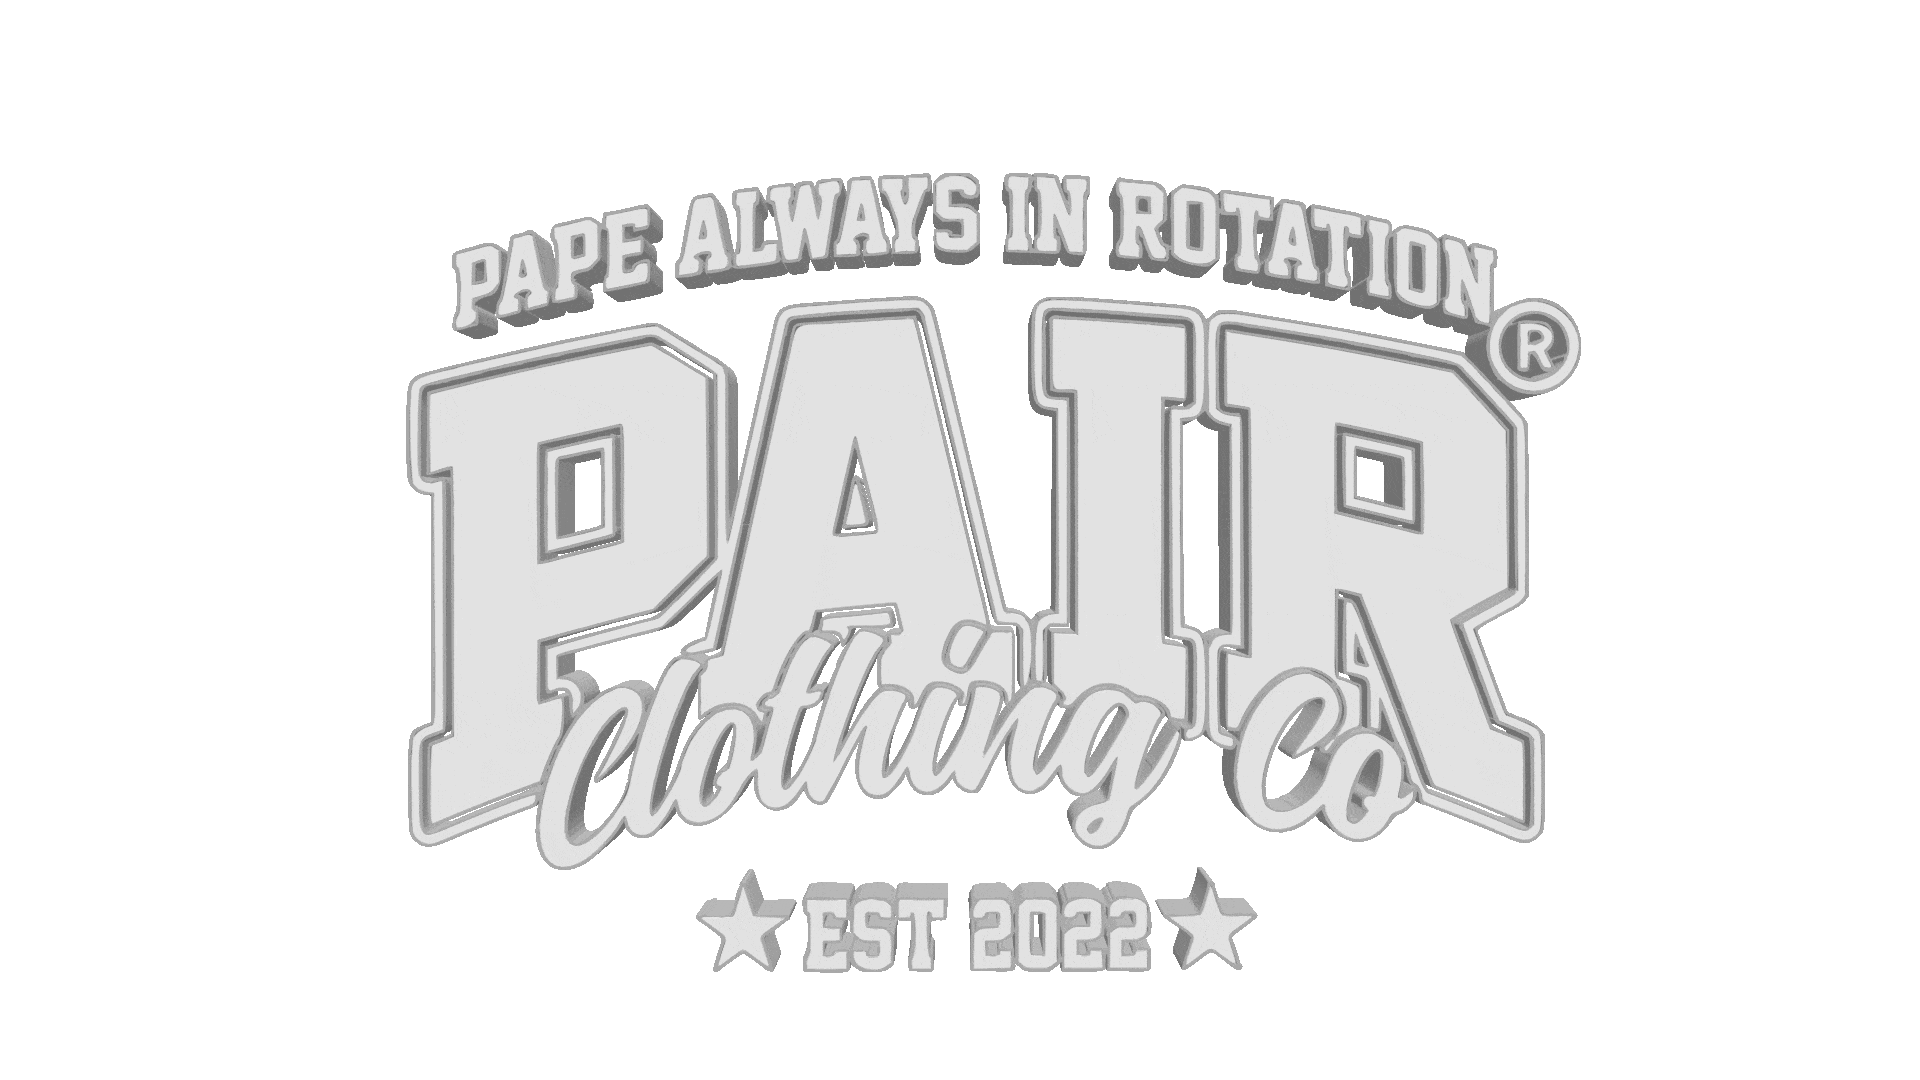 PAIR CLOTHING CO.